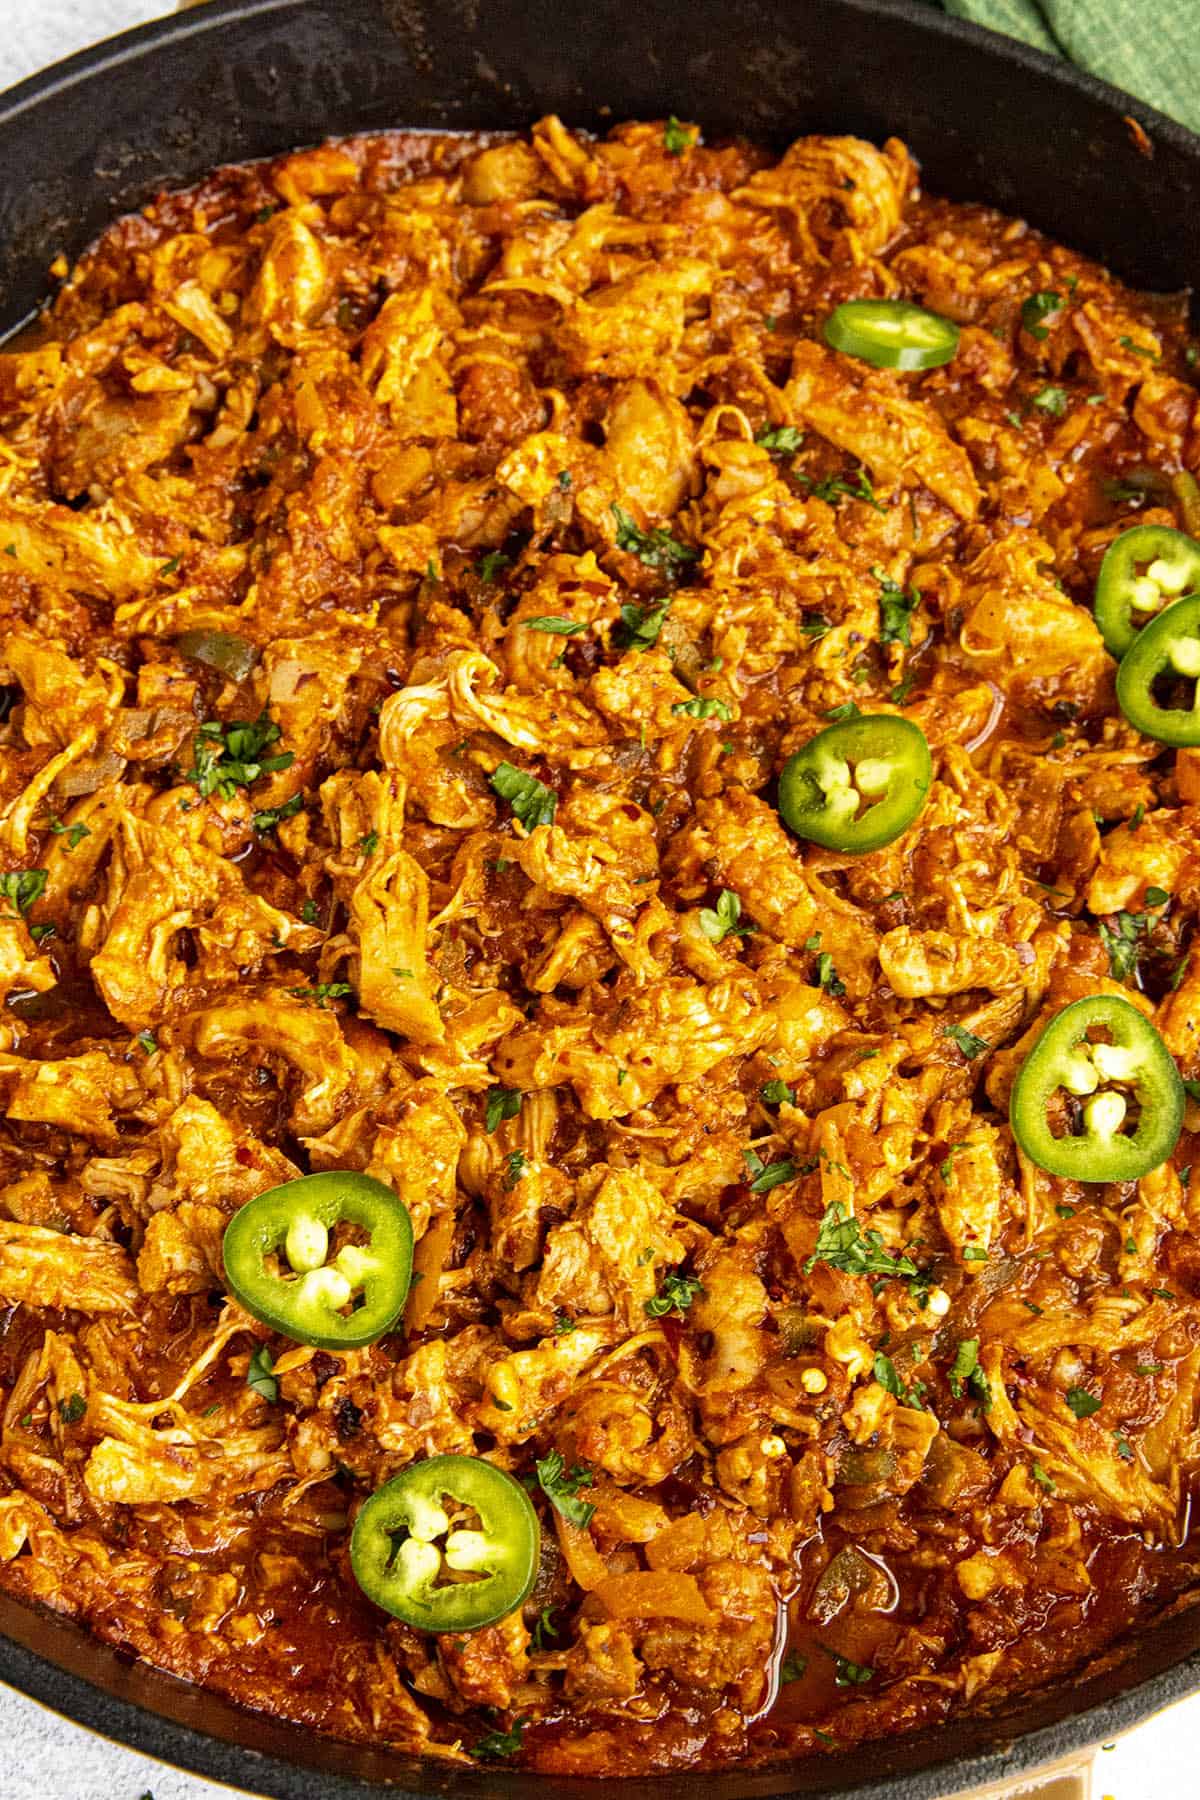 Chicken tinga garnished with sliced peppers